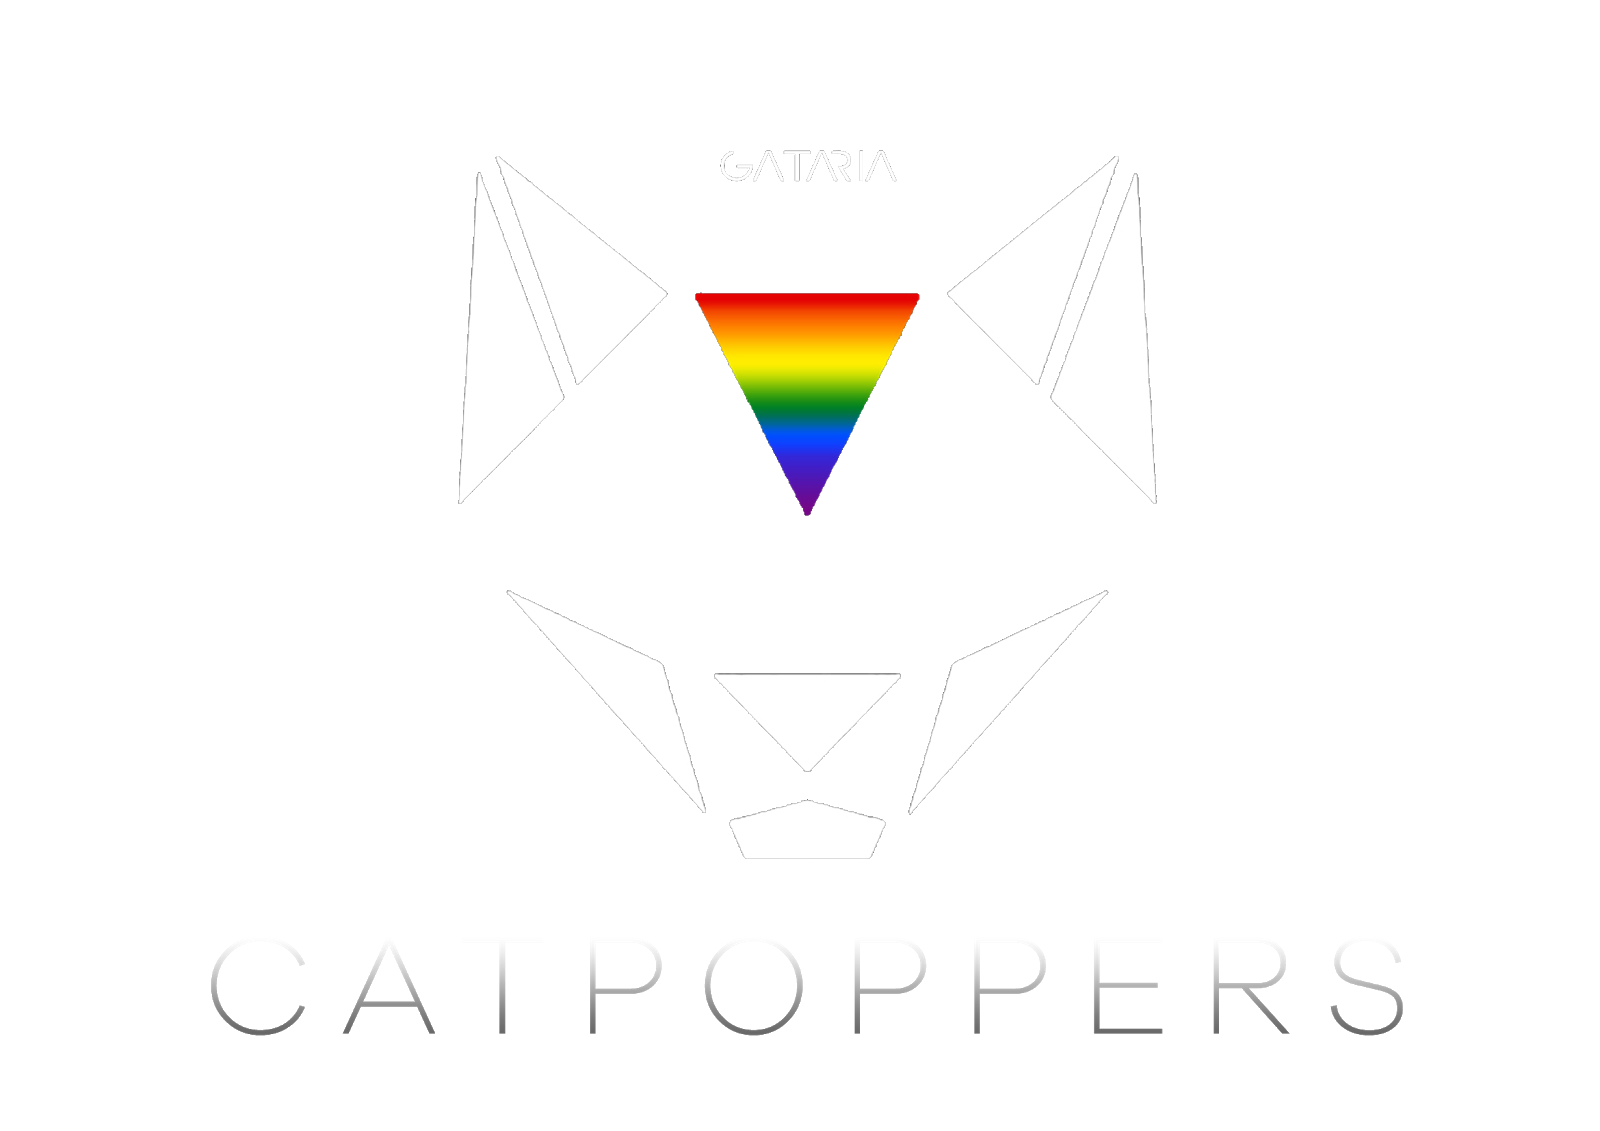 CATPOPPERS